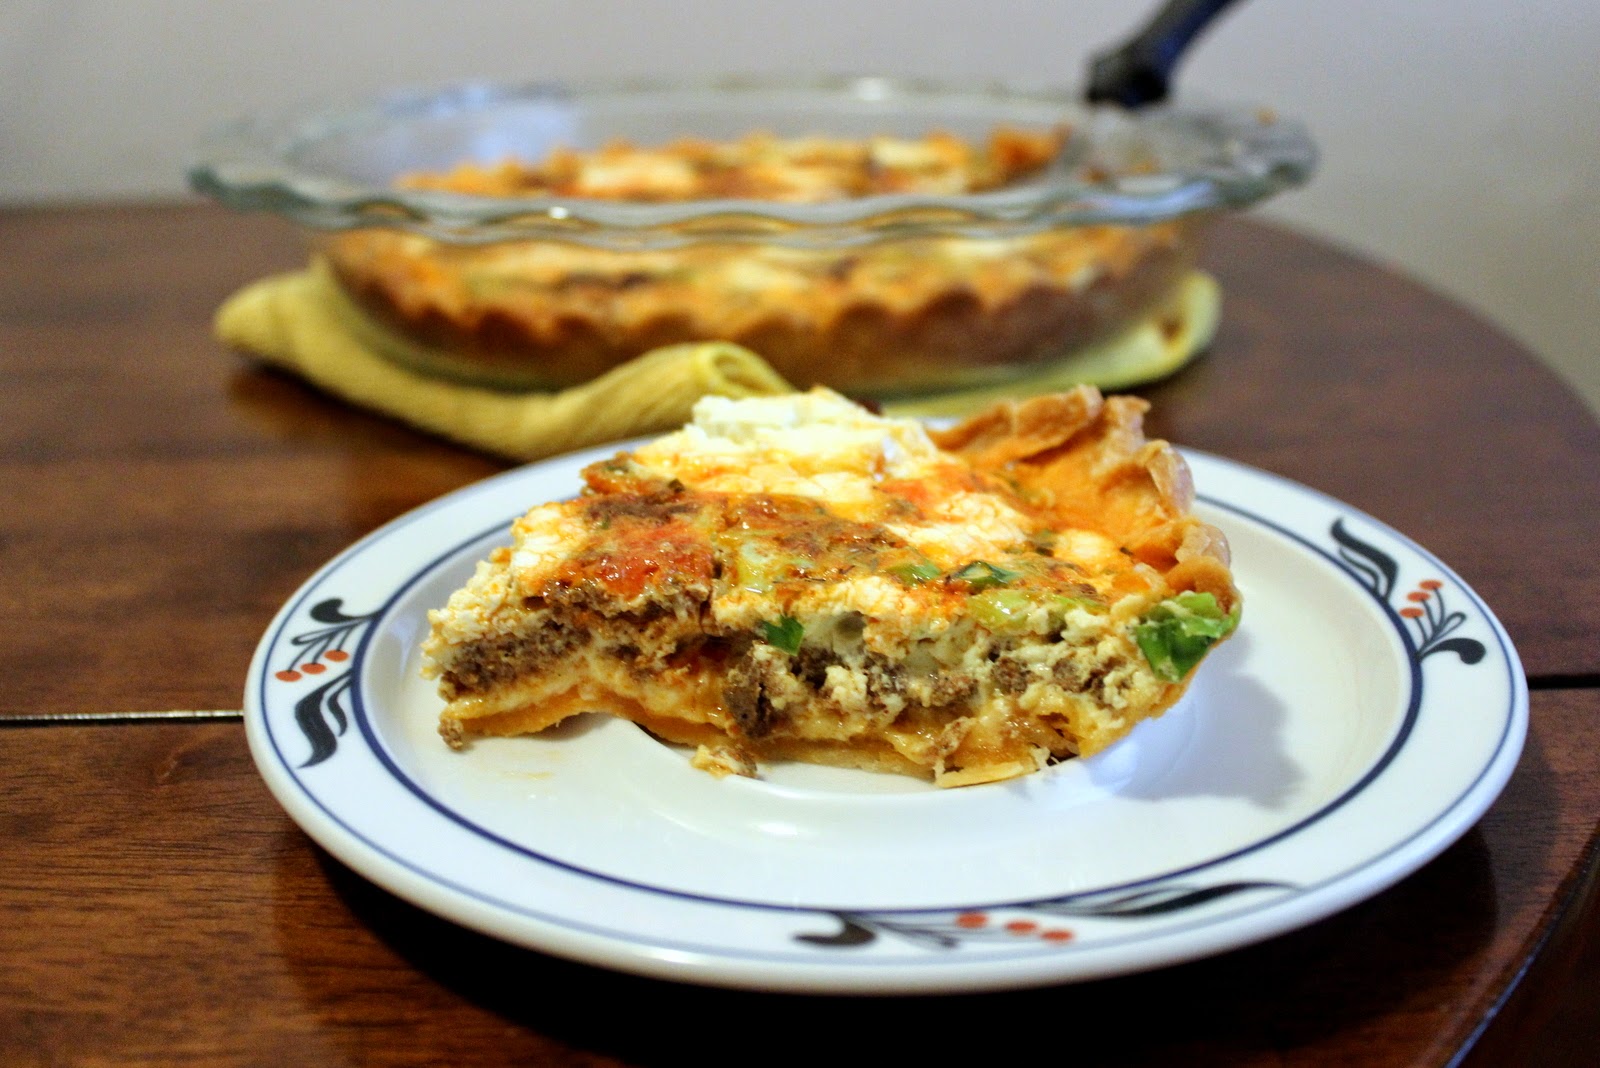 MelonChef: Bobby Flay's Chorizo and Goat Cheese Quiche